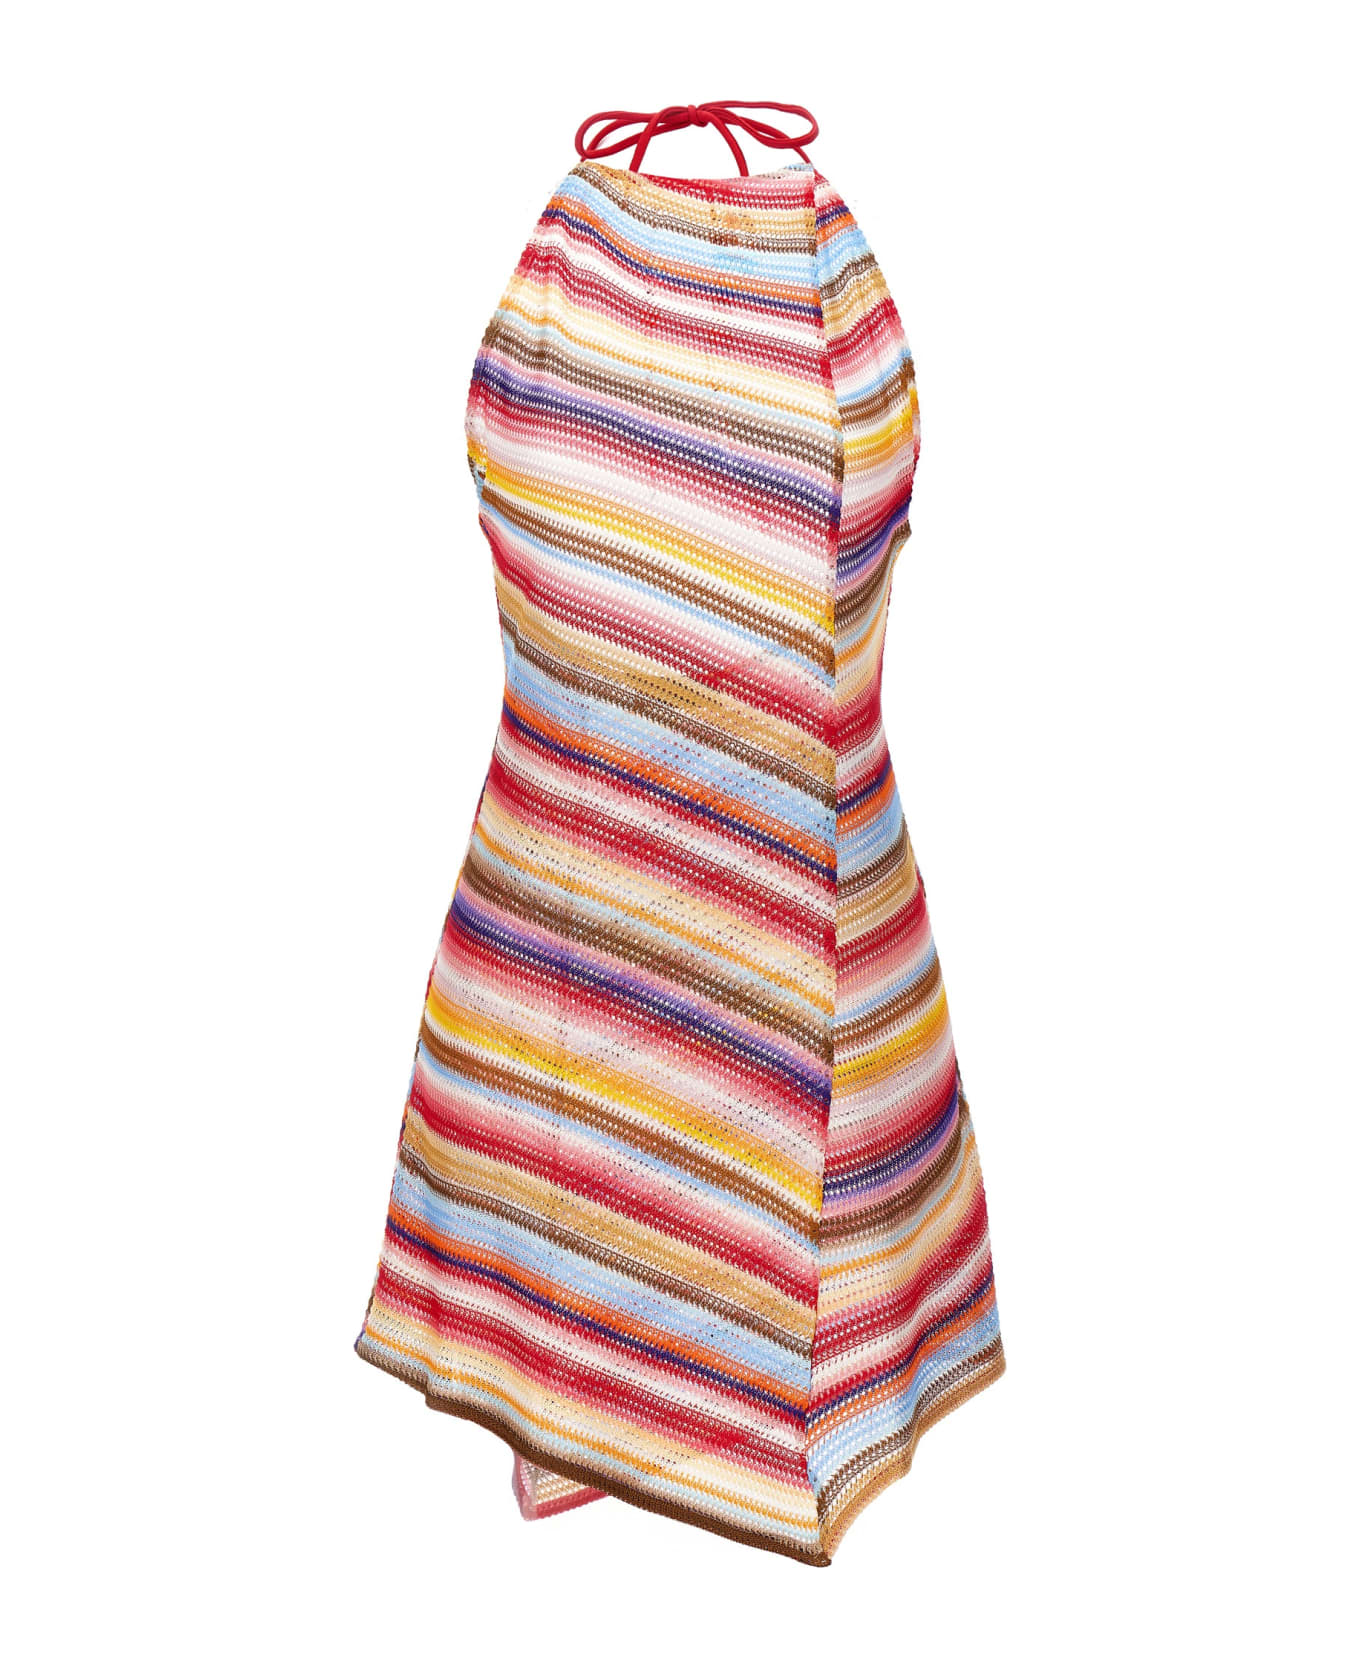 Missoni Knitted Cover-up Dress - MULTICOLOR RED STRIP